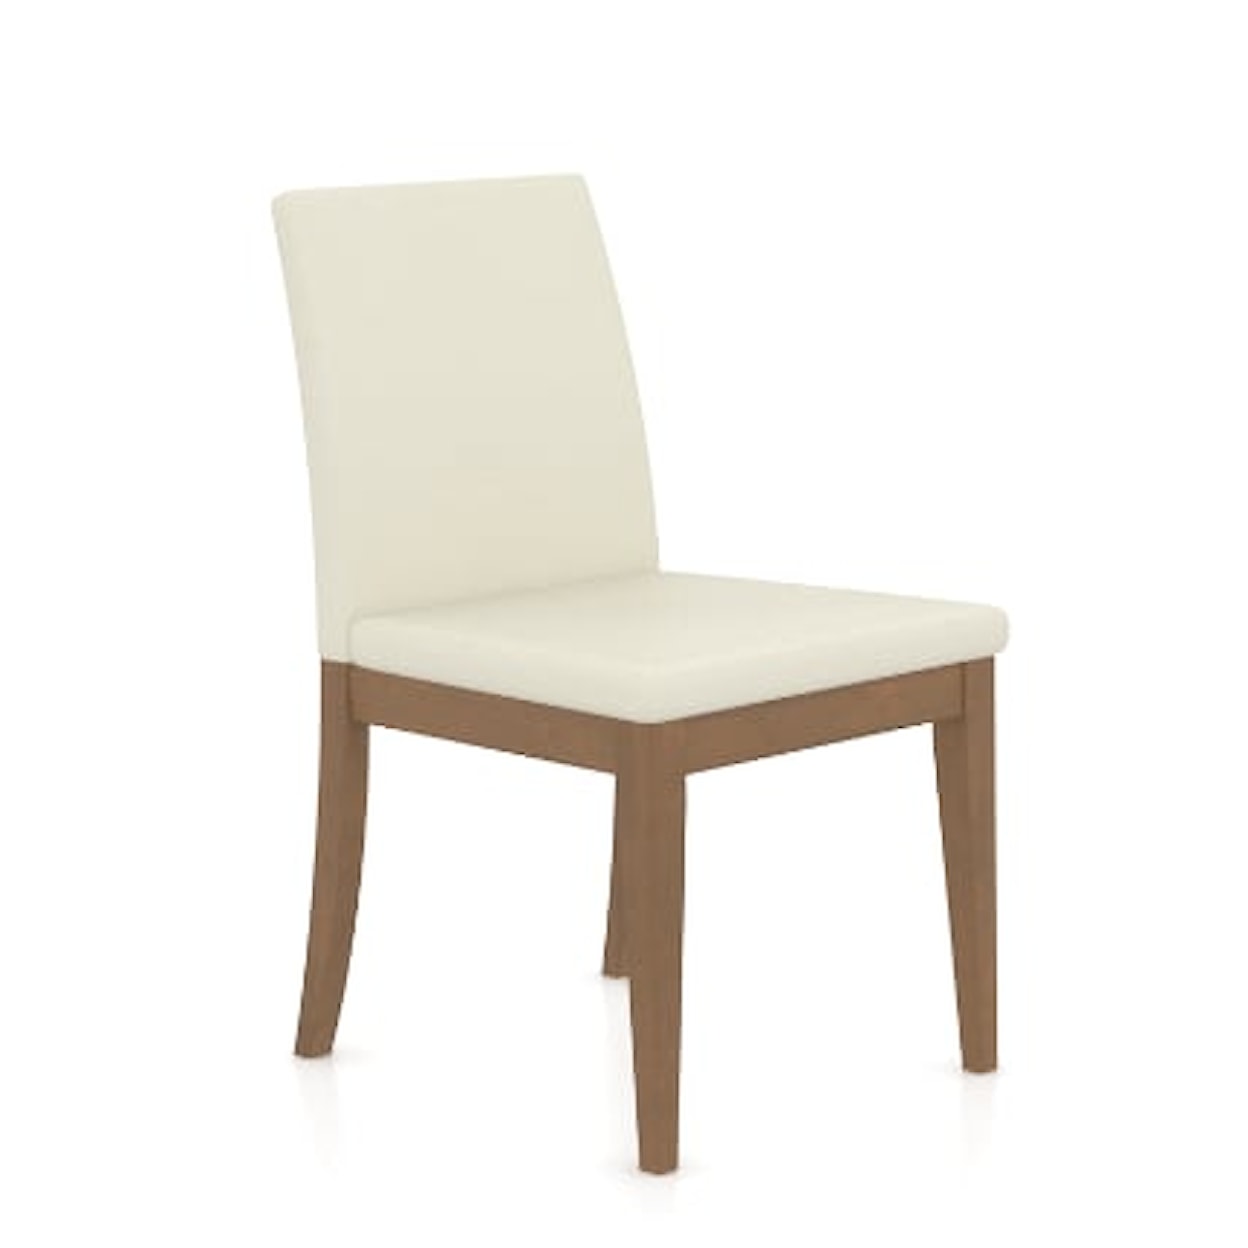 Canadel Canadel Customizable Side Chair